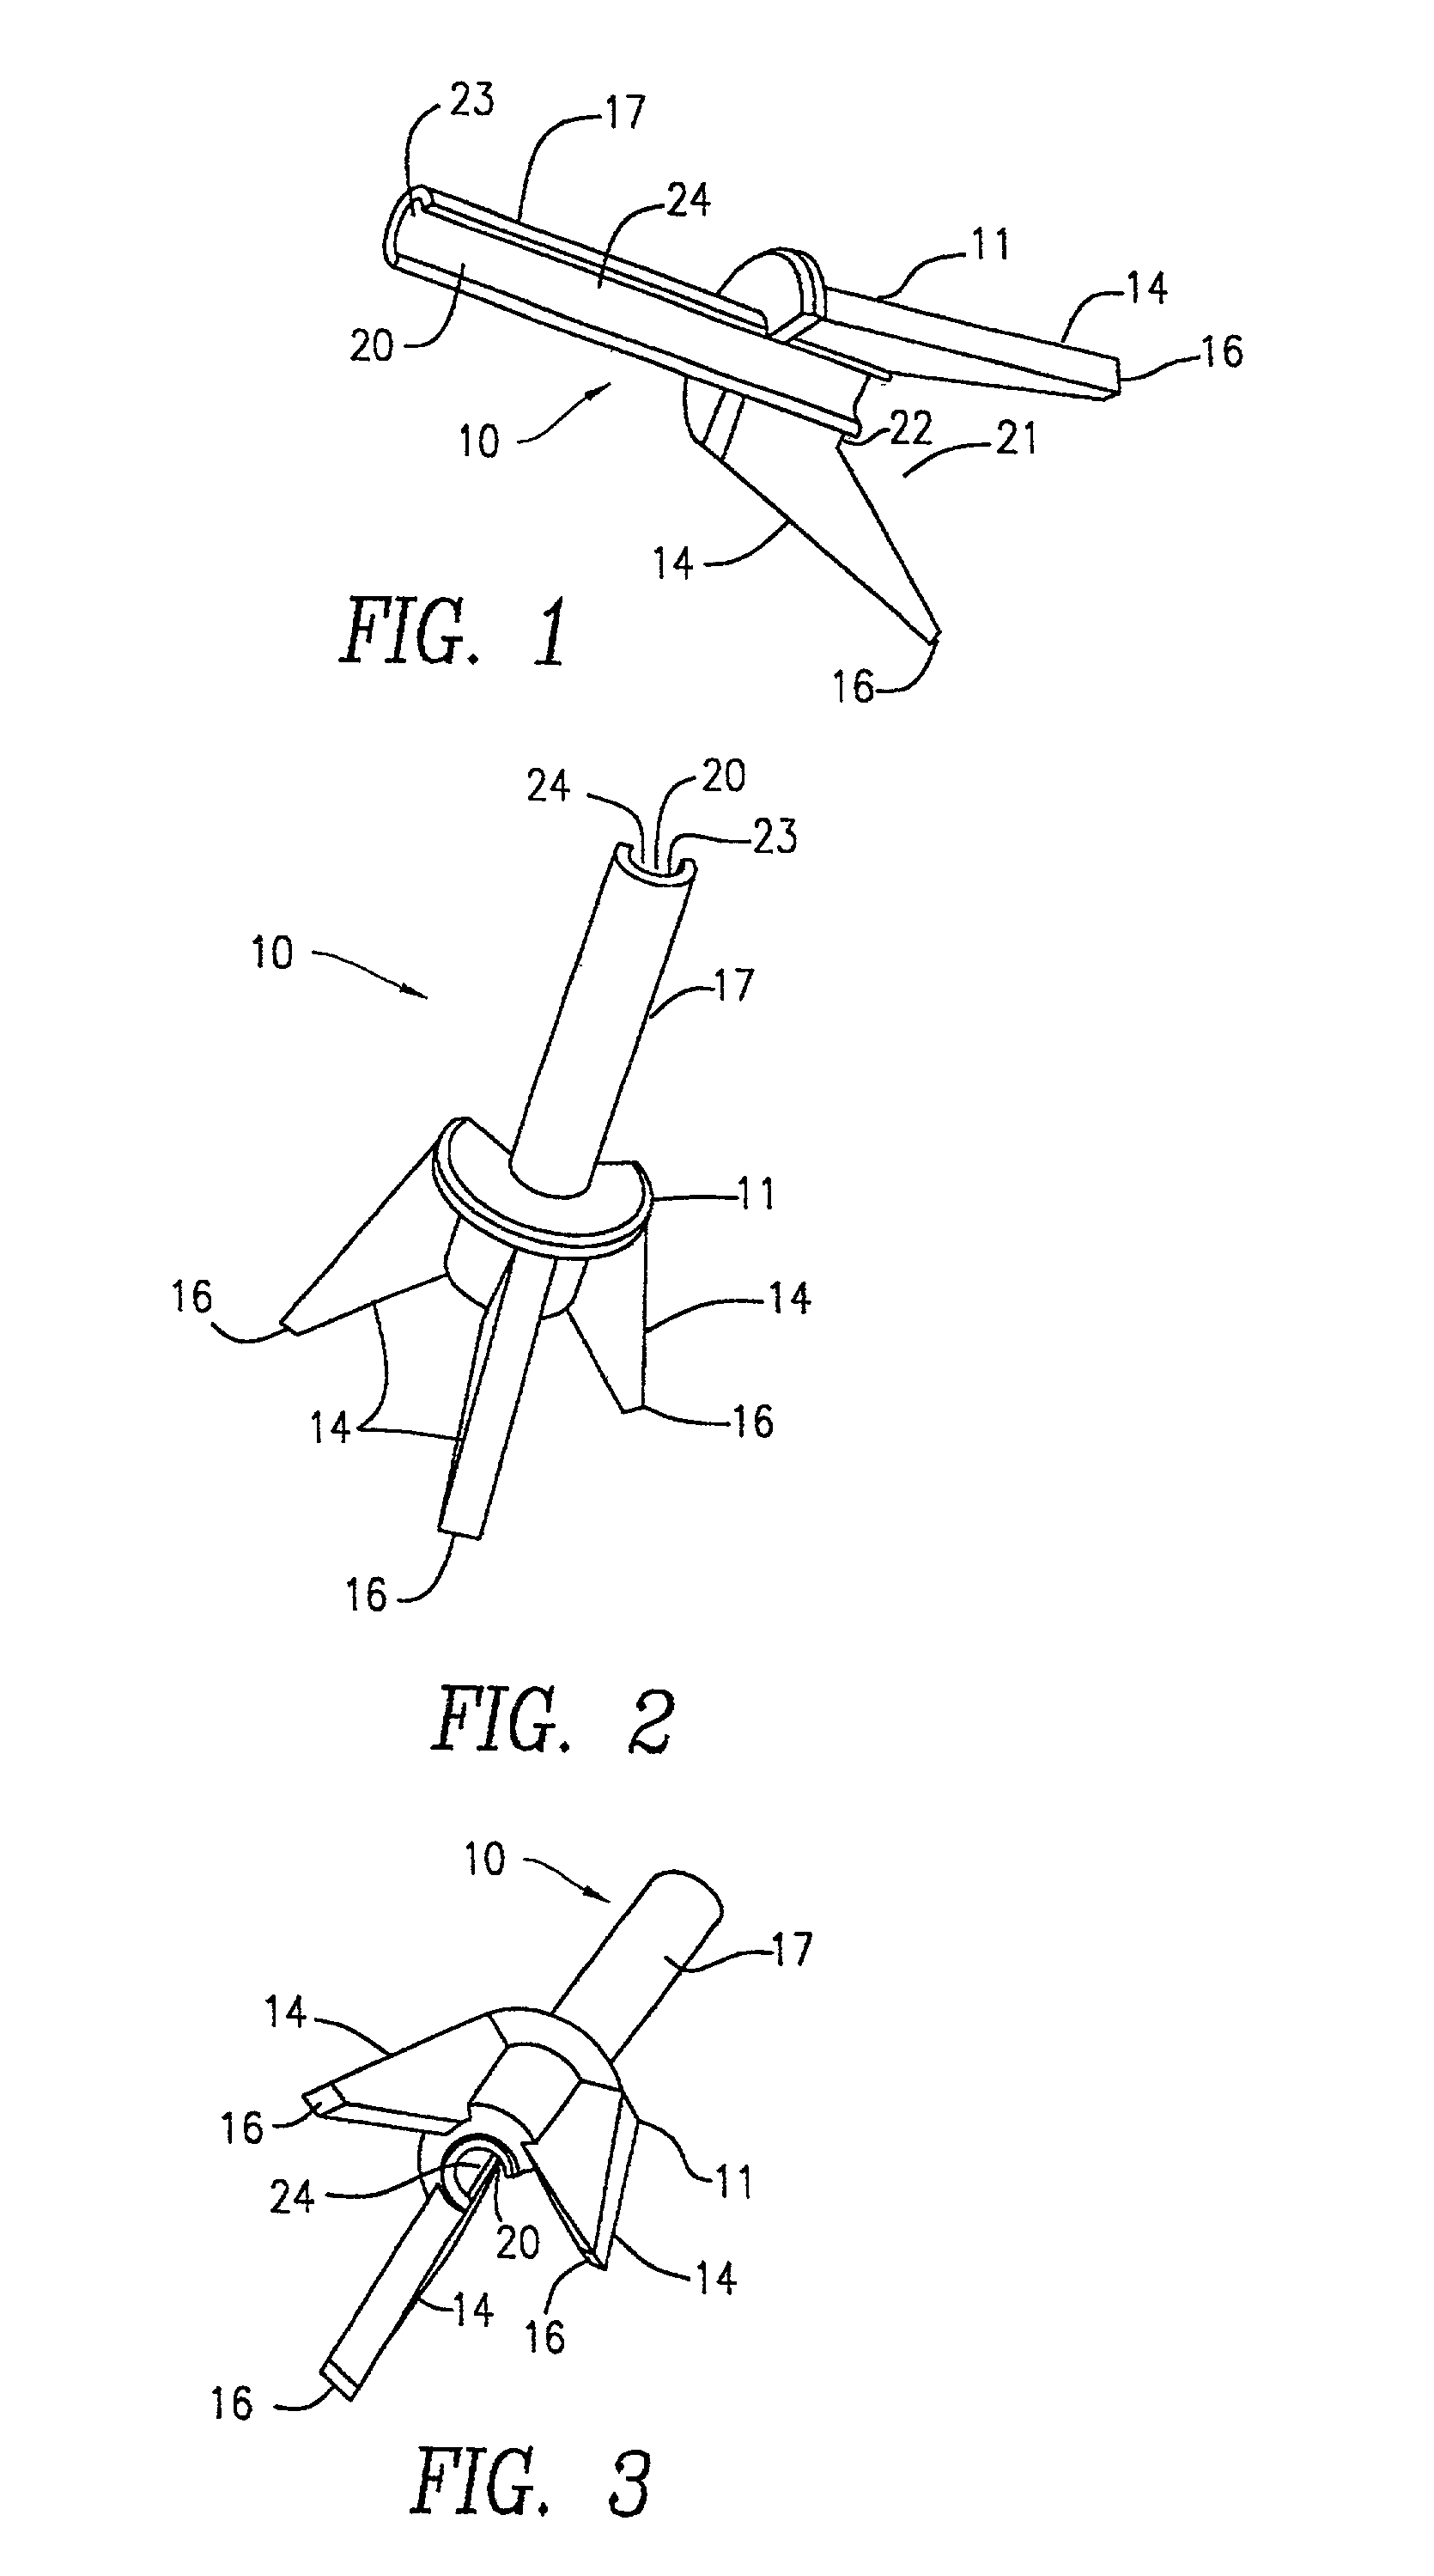 Slotted catheter guide for perpendicular insertion into a cranium orifice